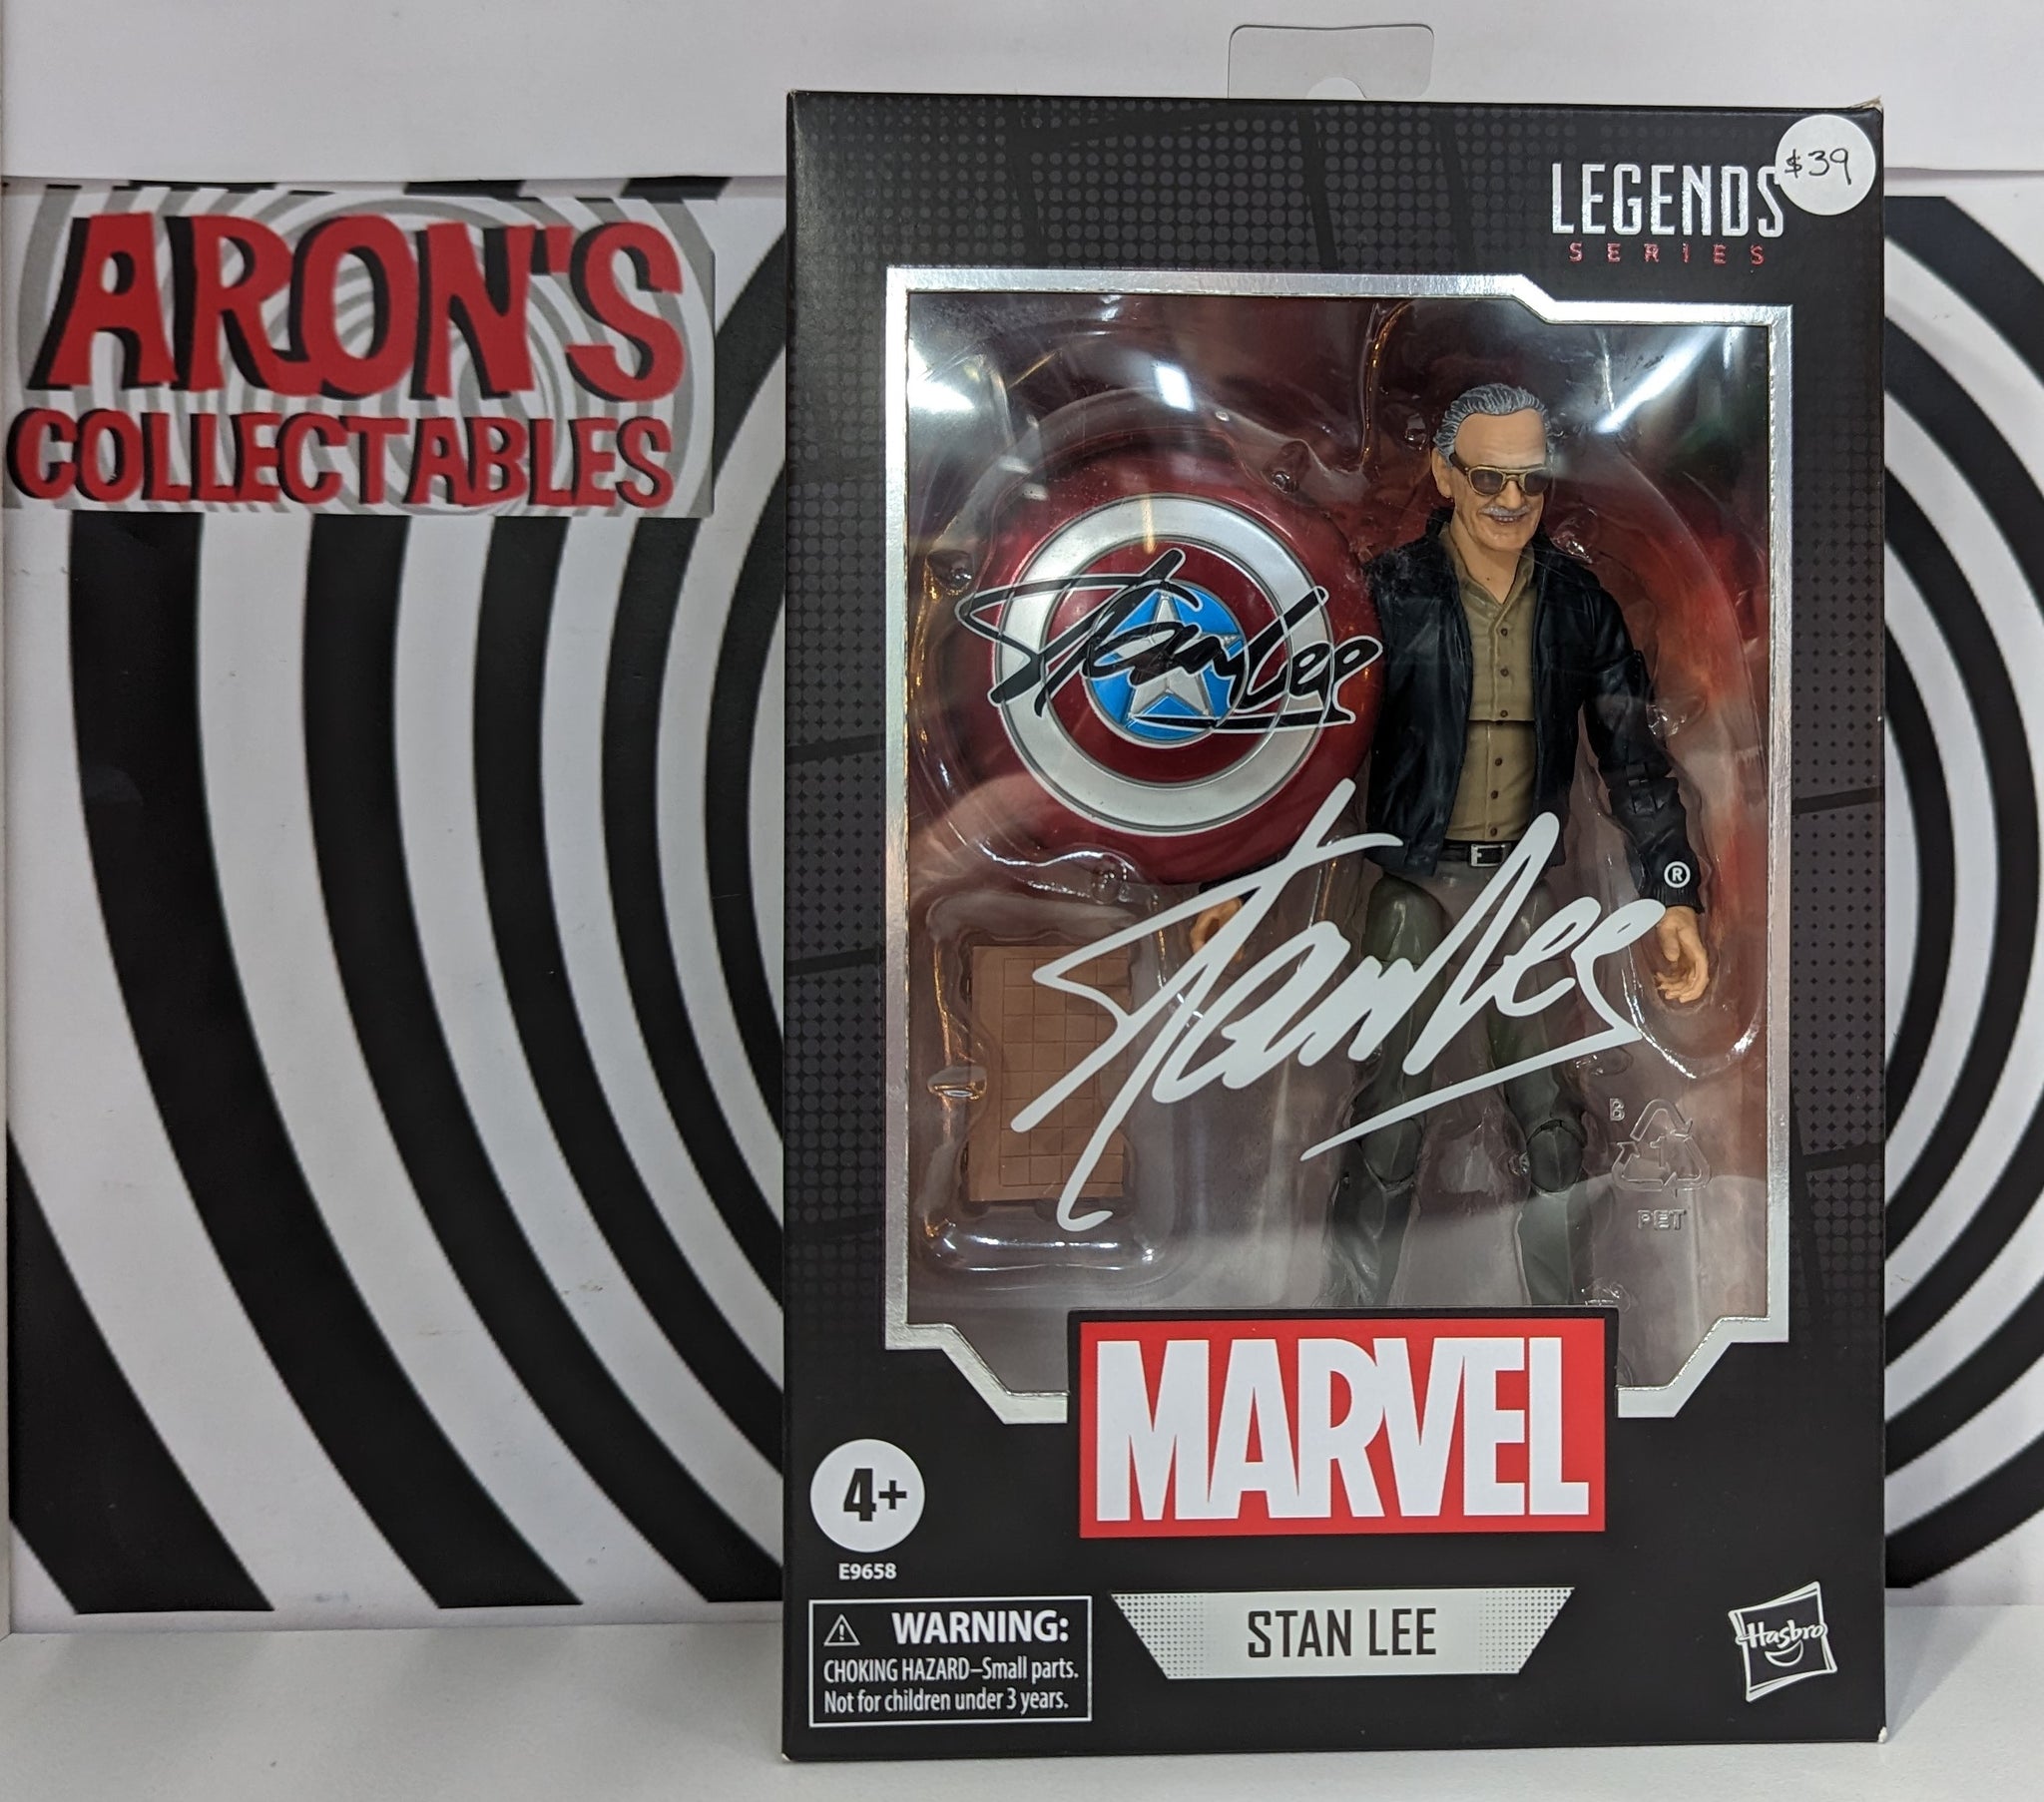 Marvel Legends Series Stan Lee Action Figure – Arons Collectables